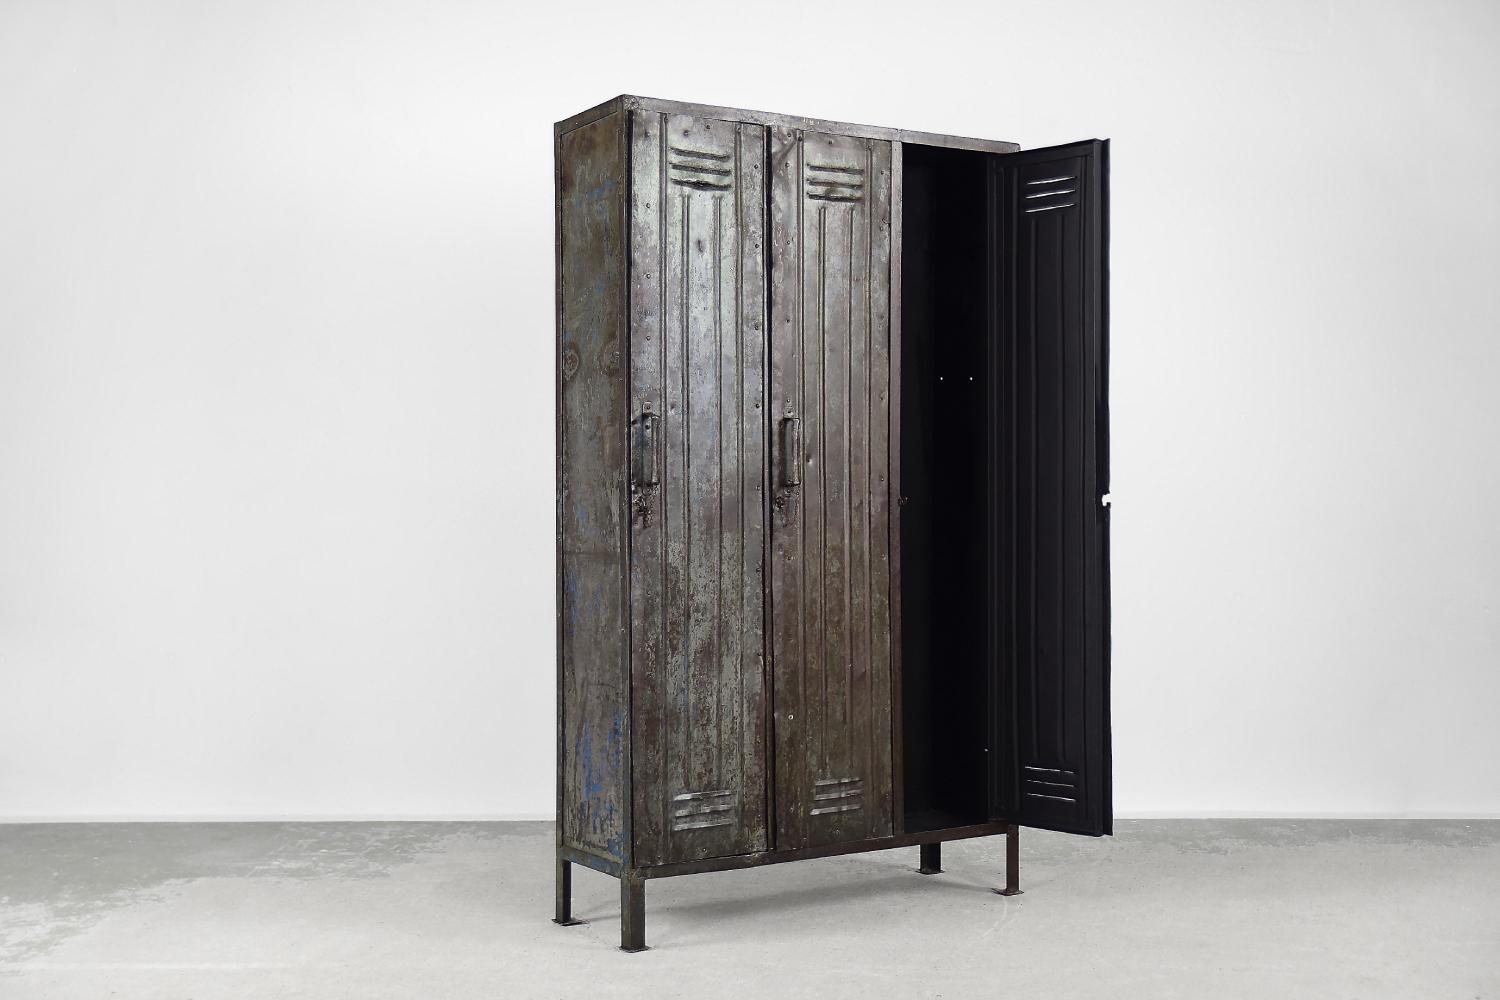 This industrial, metal factory cabinet was produced during the 1950s. The wardrobe has three doors with ventilation openings. There are hangers for clothes inside. Layers of paints and varnishes, combined with natural tarnish, create a